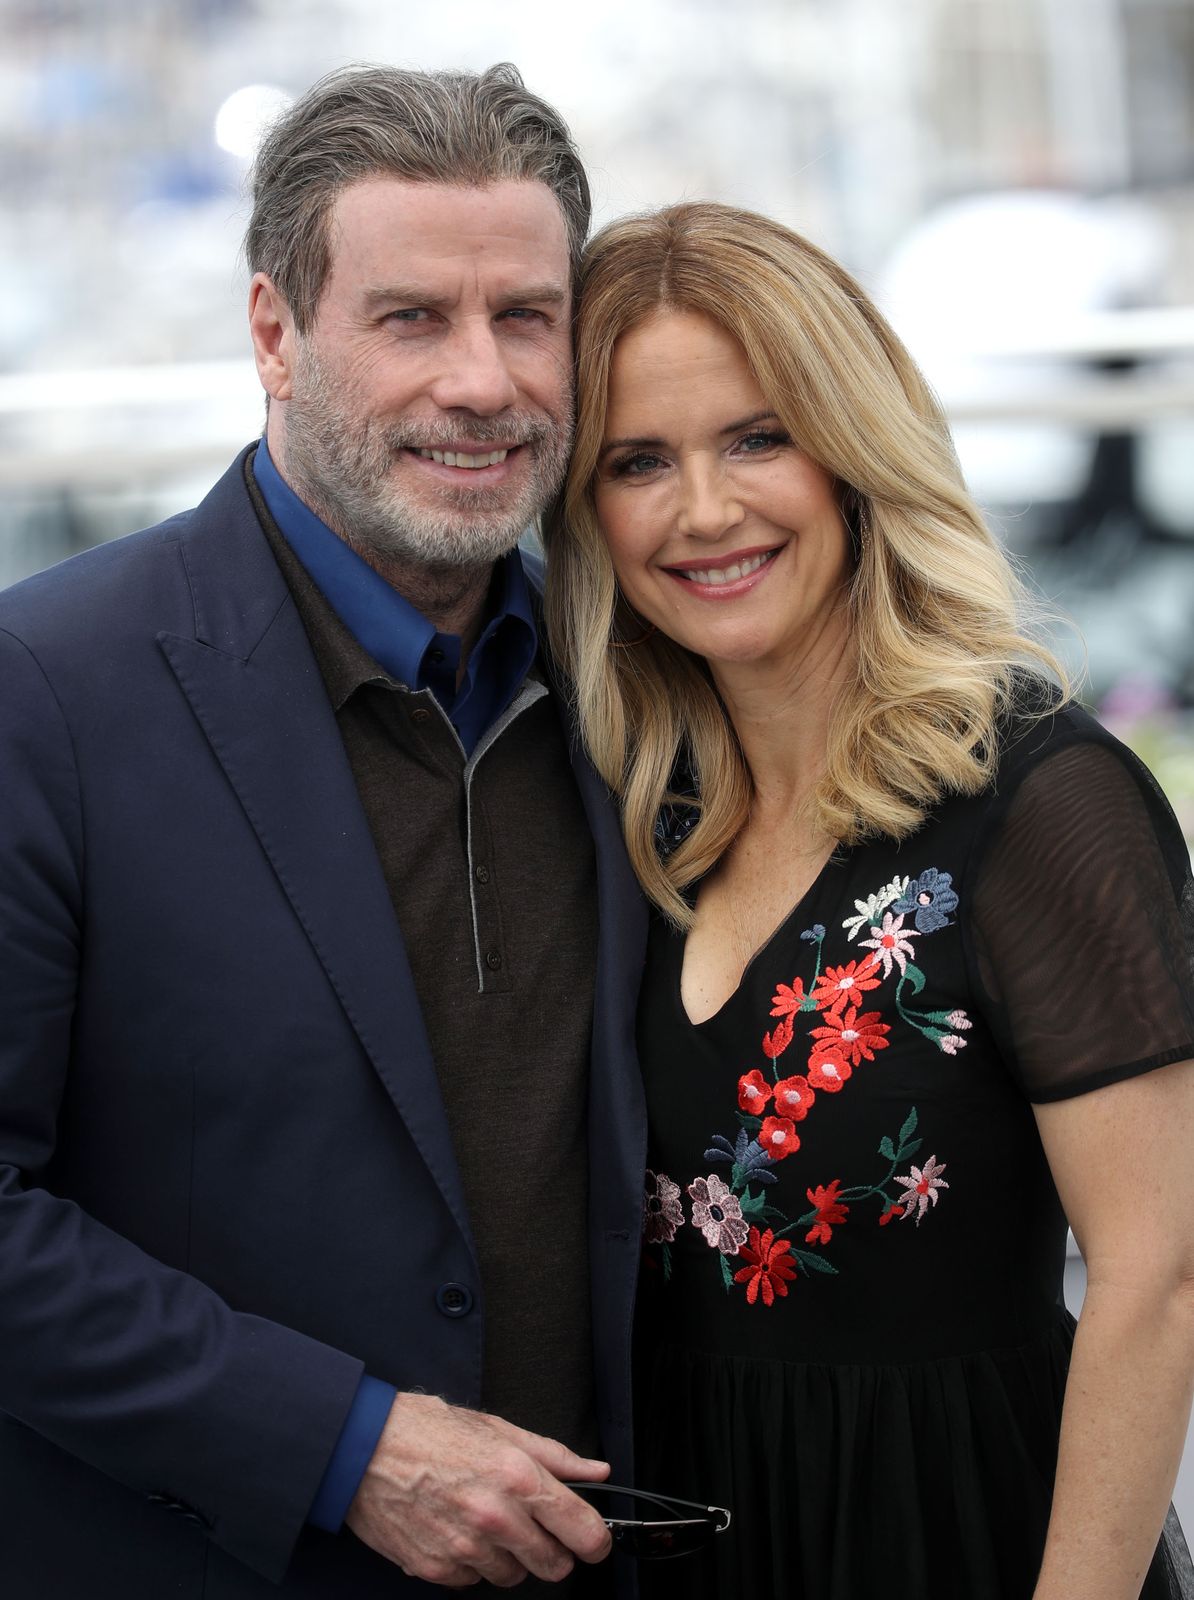 John Travolta and Kelly Preston at the photocall for the "Gotti" during the 71st annual Cannes Film Festival on May 15, 2018, in France | Photo: Mike Marsland/Mike Marsland/WireImage/Getty Images